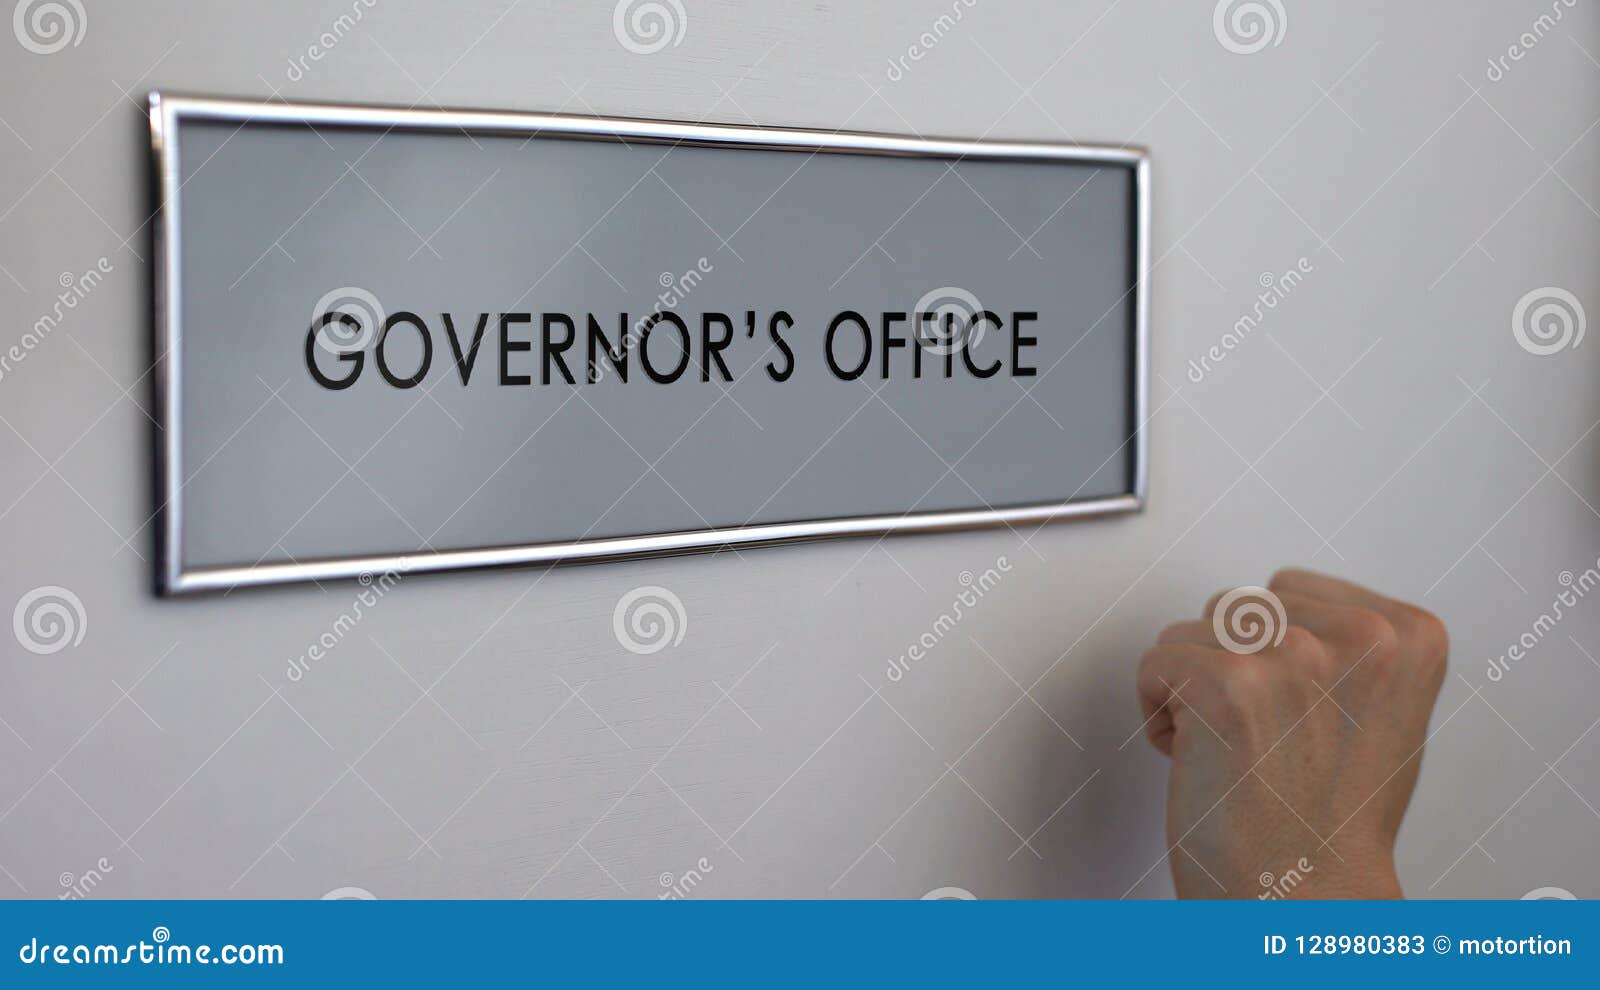 governor office door, hand knocking closeup, visit to public official, authority